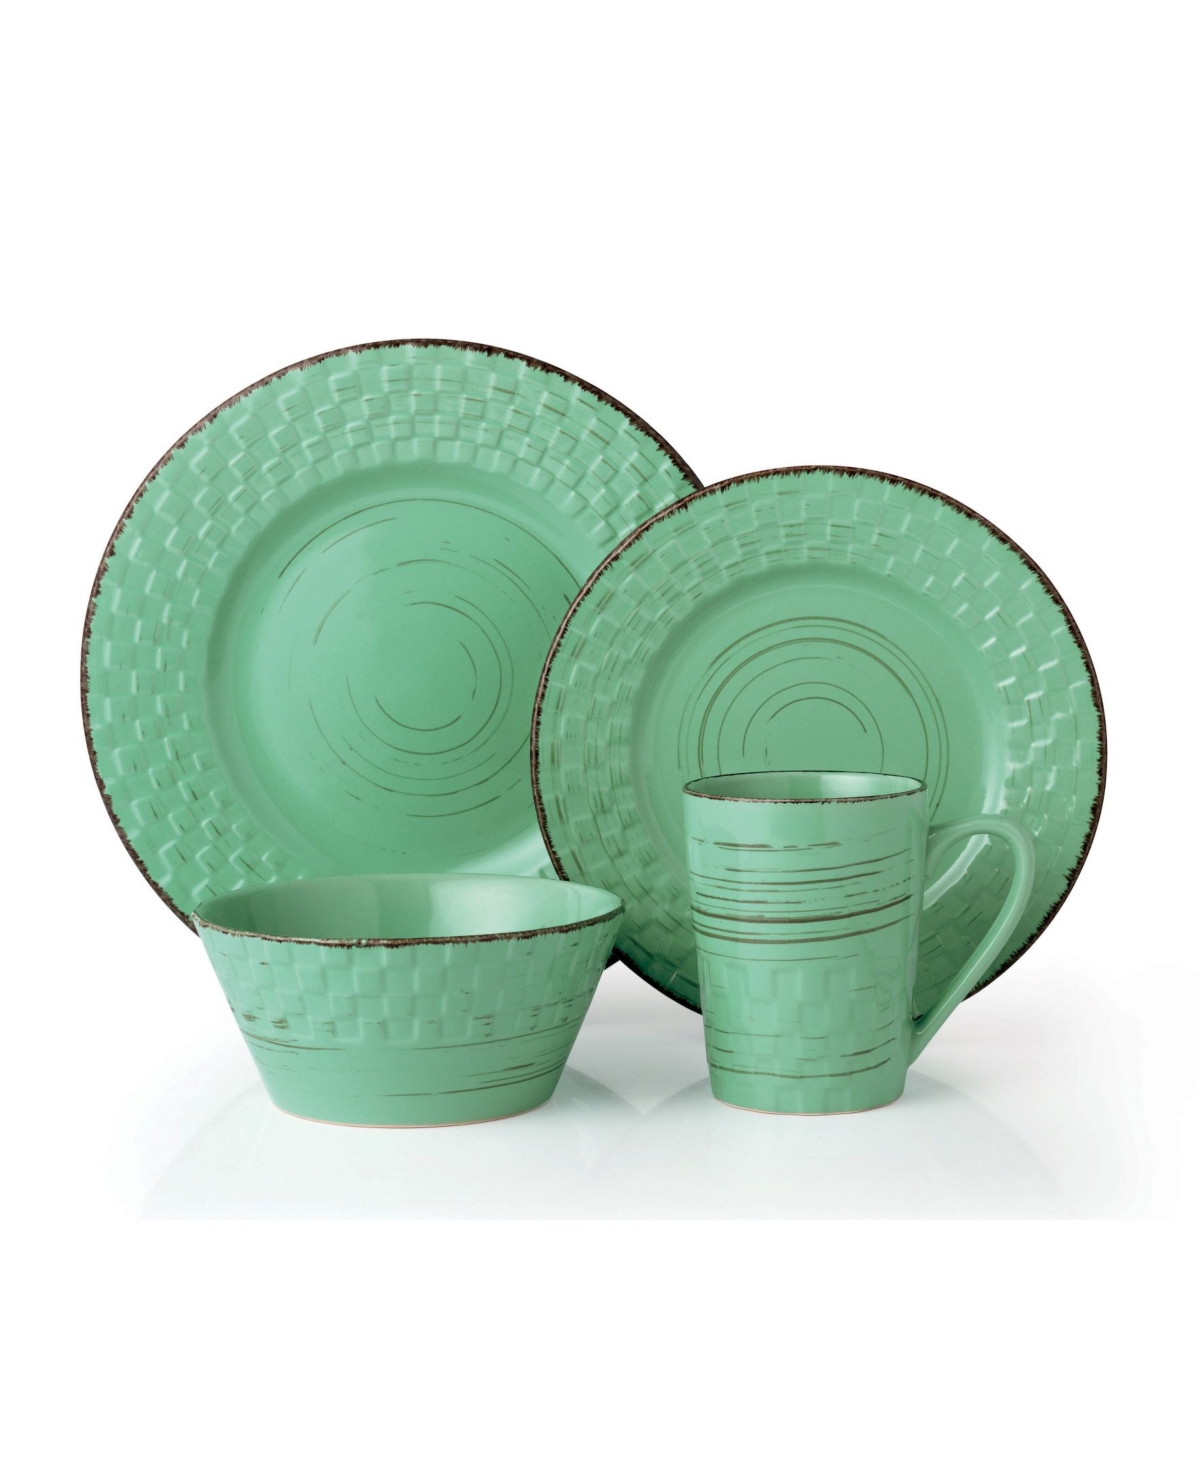 16 Piece Distressed Weave Dinnerware Set, Service for 4 - Green